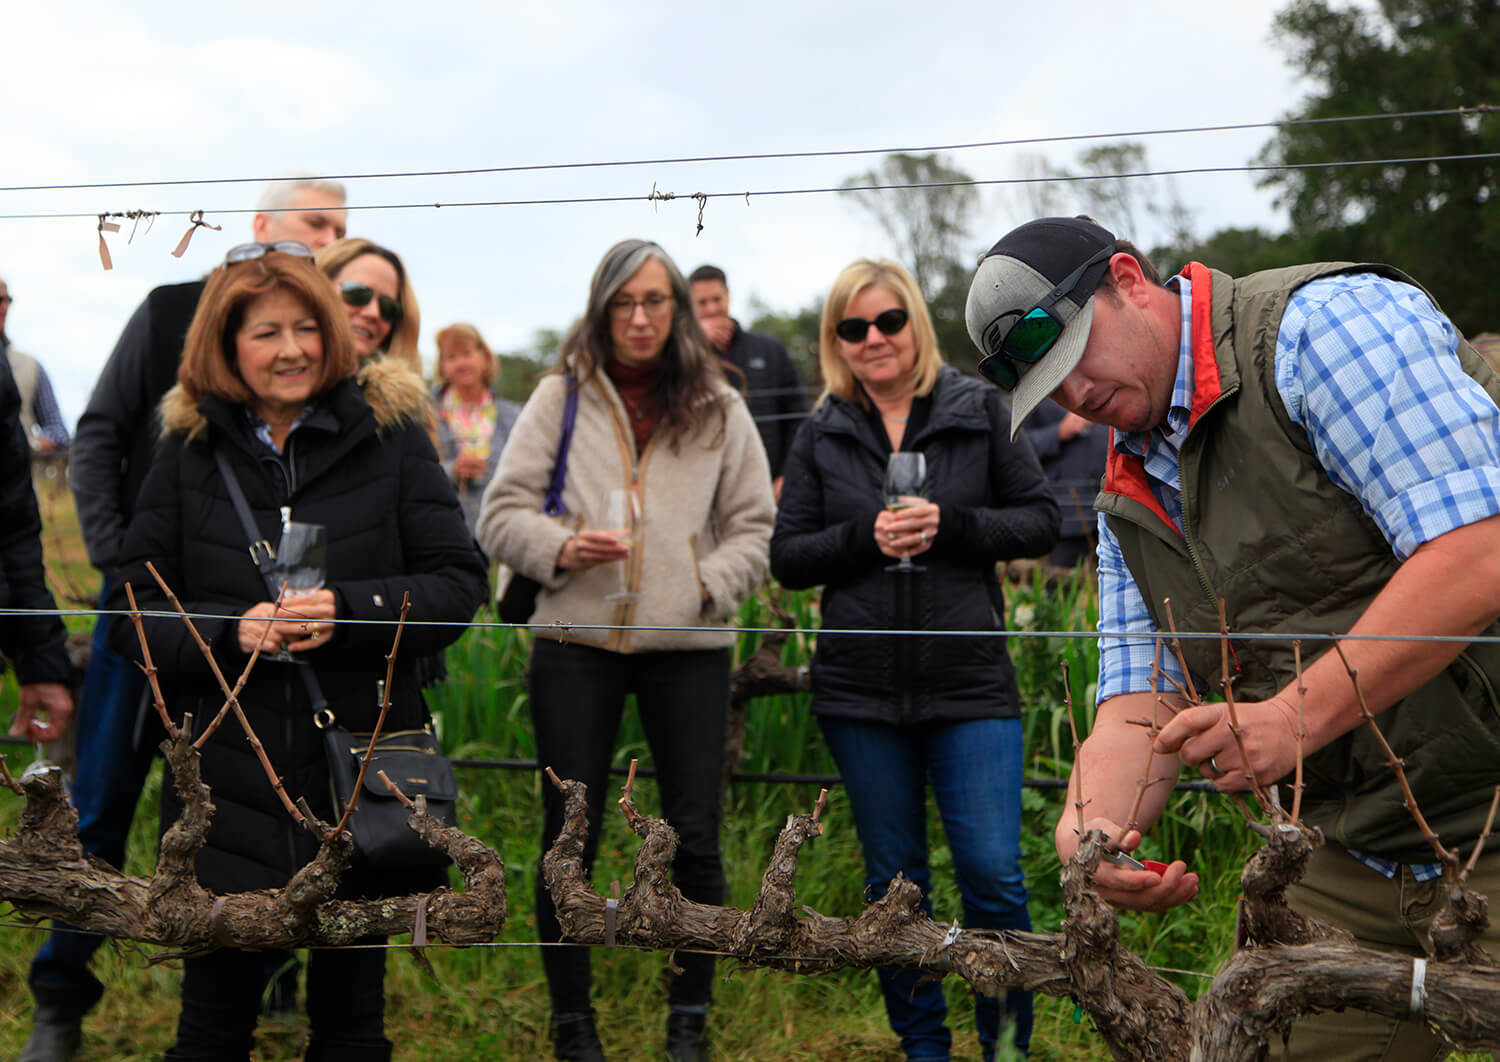 People holding wine glasses looking at person cutting twig